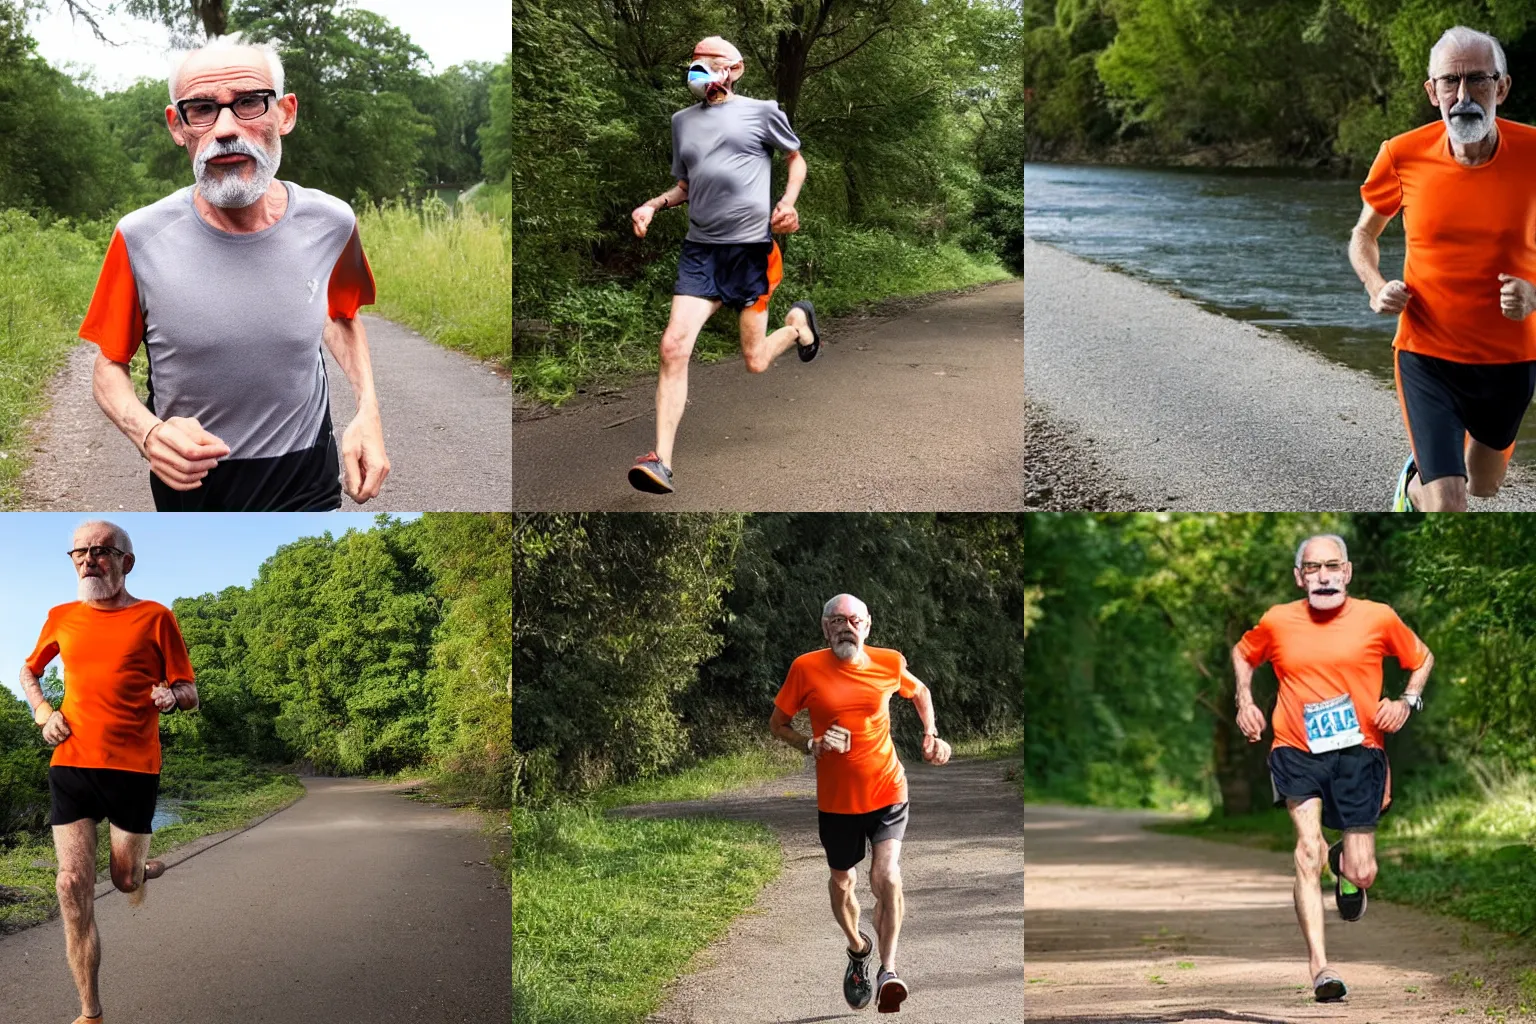 Prompt: a skinny old man with glasses, a very short grey beard and moustache, wearing an orange t-shirt, running barefoot along a path beside a wide river, other runners behind him